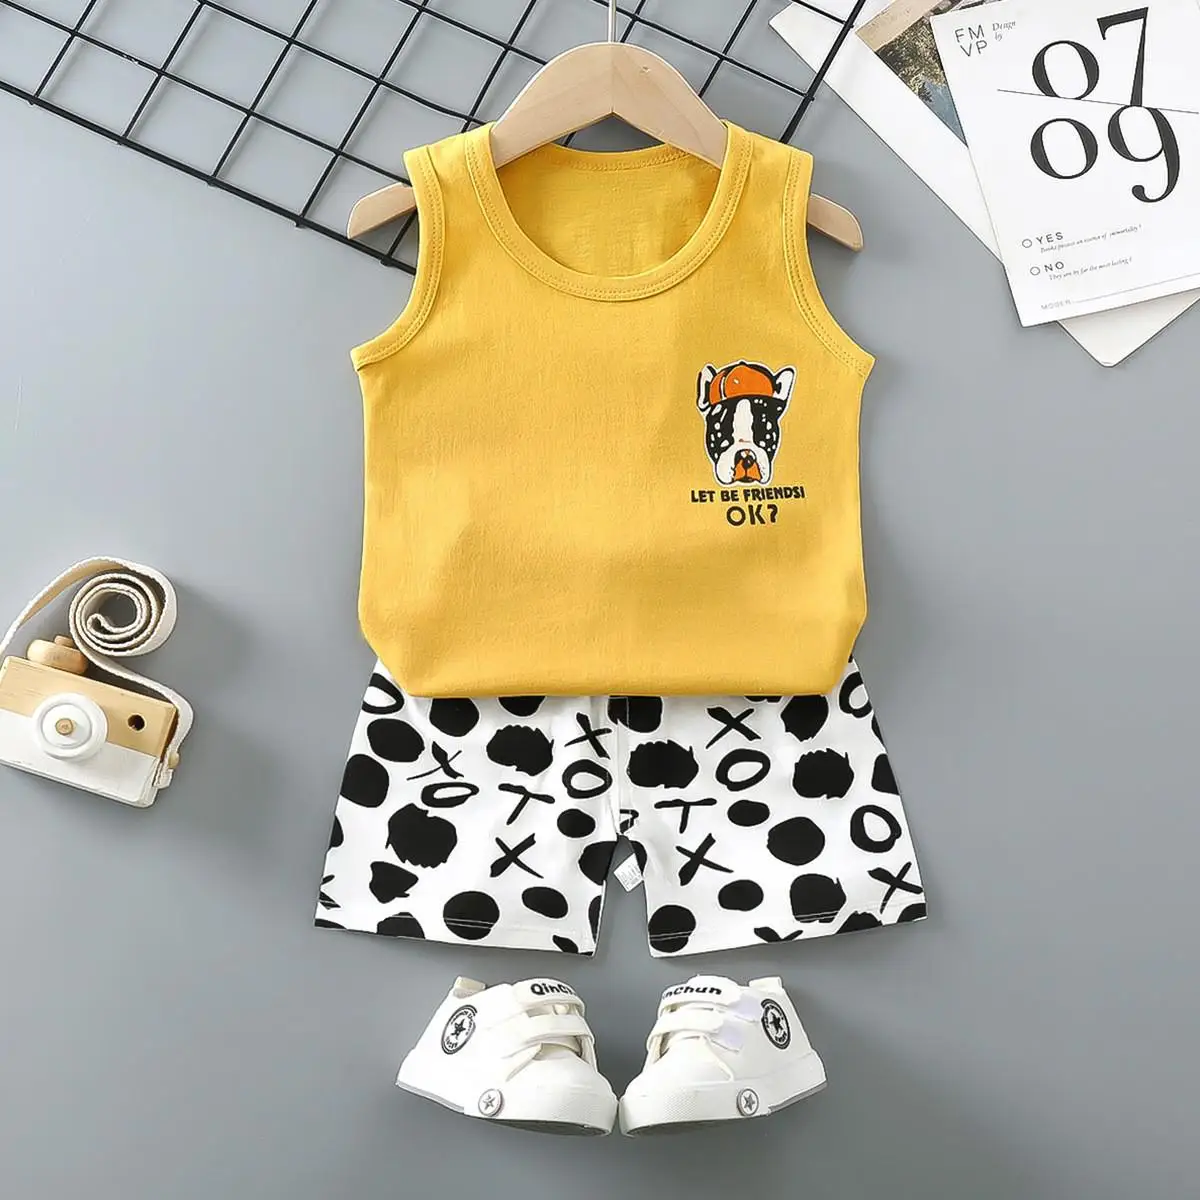 Brand Summer Clothing Toddler Outfit Baby Boy Clothes Set Sleeveless Vest+shorts 1 2 3 4years Old Kids 2pcs/set Girls Vest Sets small baby clothing set	 Baby Clothing Set